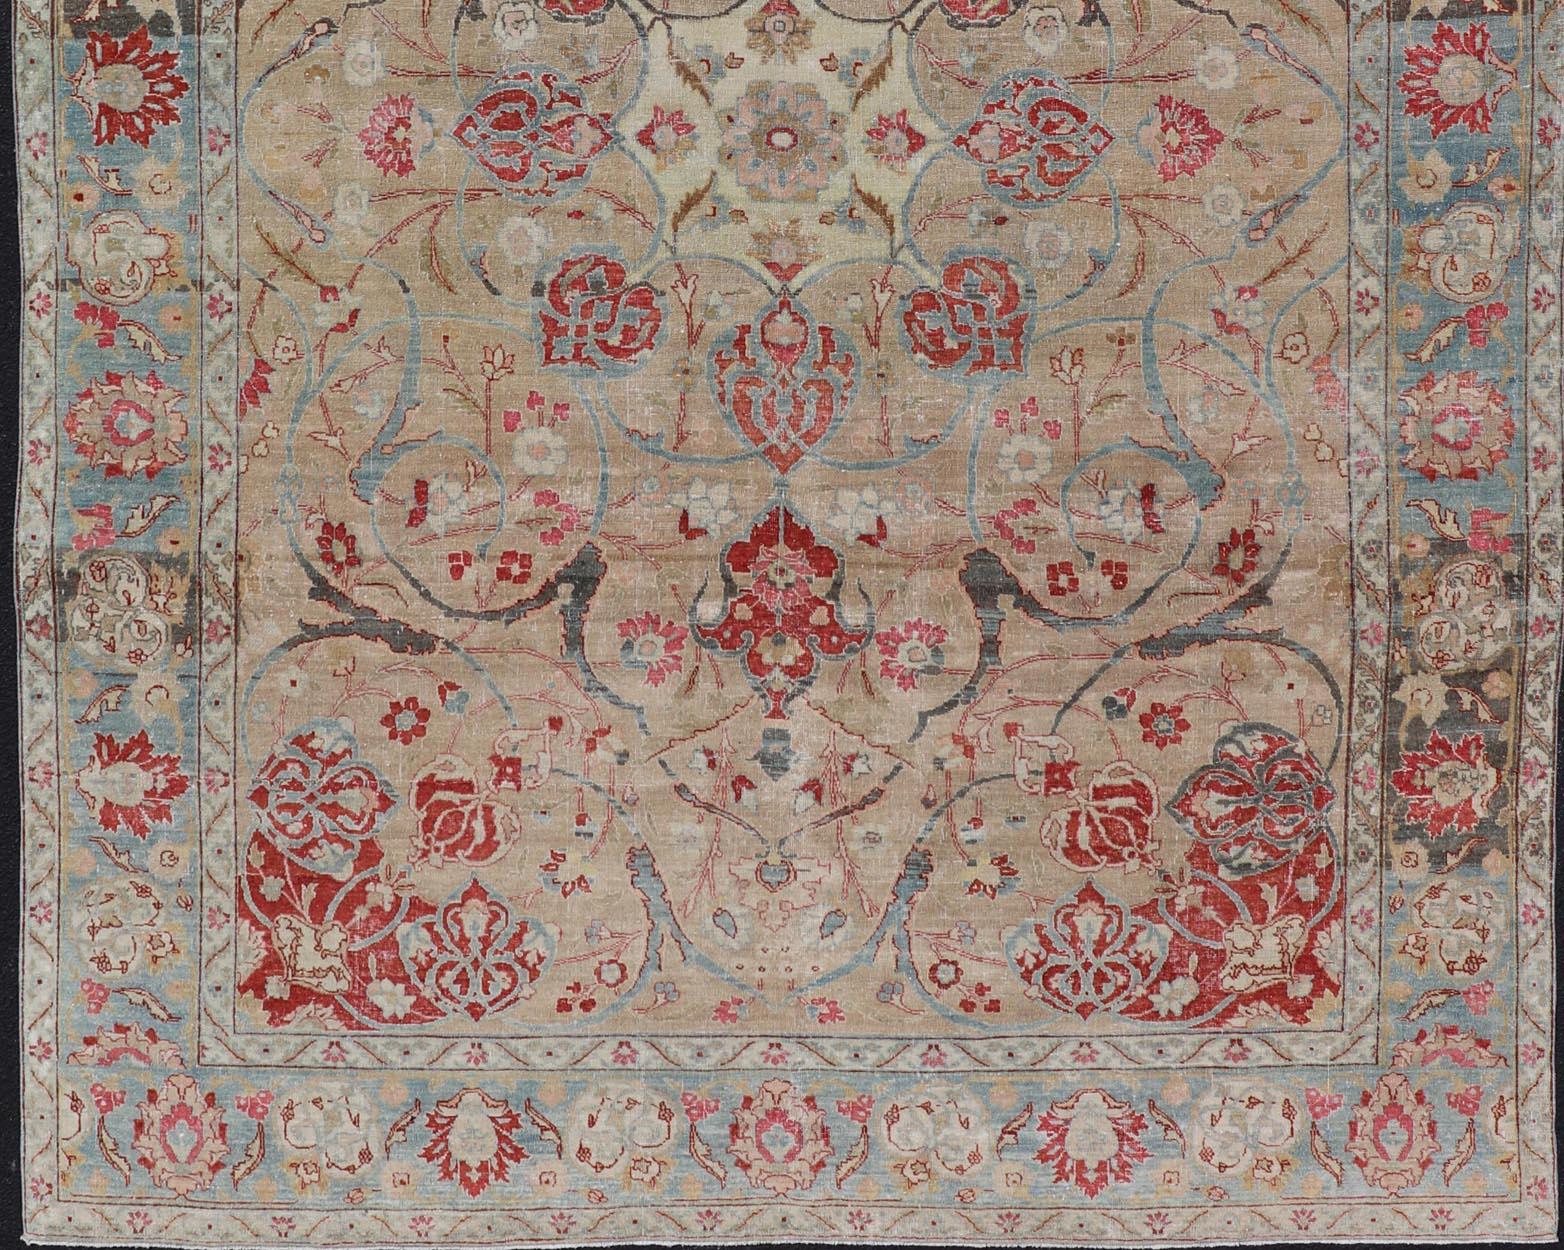 Antique Persian Tabriz Rug with Floral Medallion Design in Tan, Red, and Blue For Sale 2